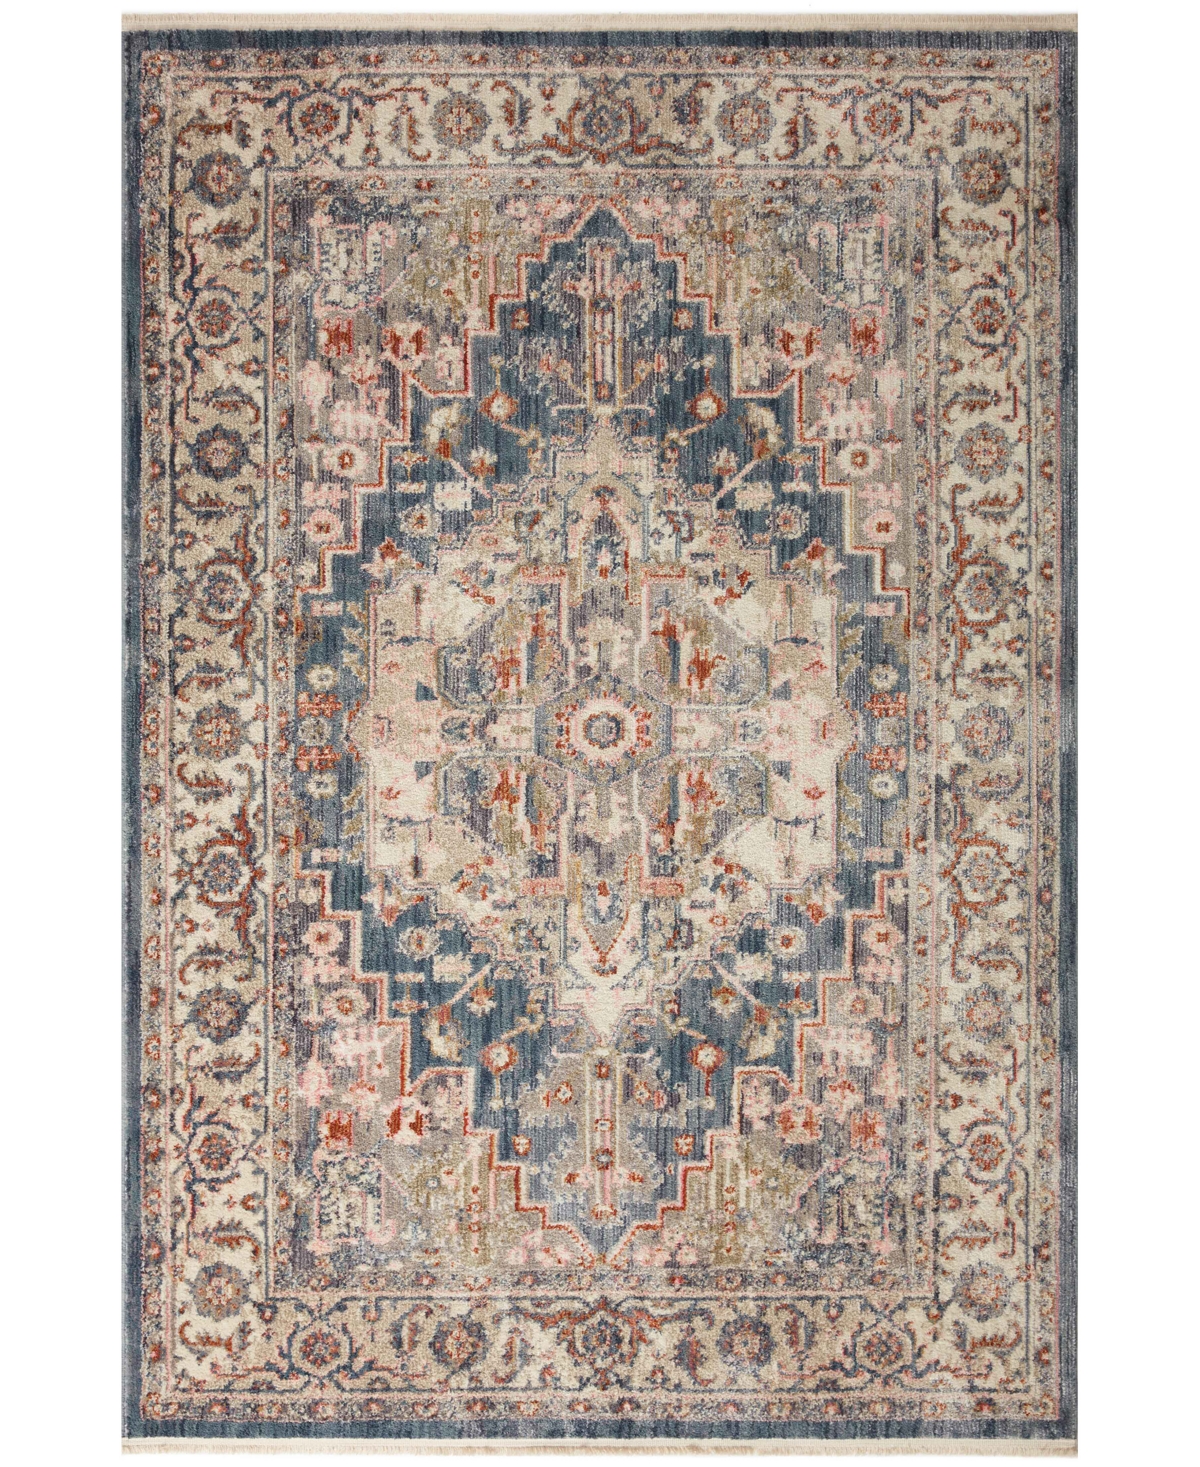 Magnolia Home By Joanna Gaines X Loloi Janey Jay-03 7'10" X 10'10" Area Rug In Indigo